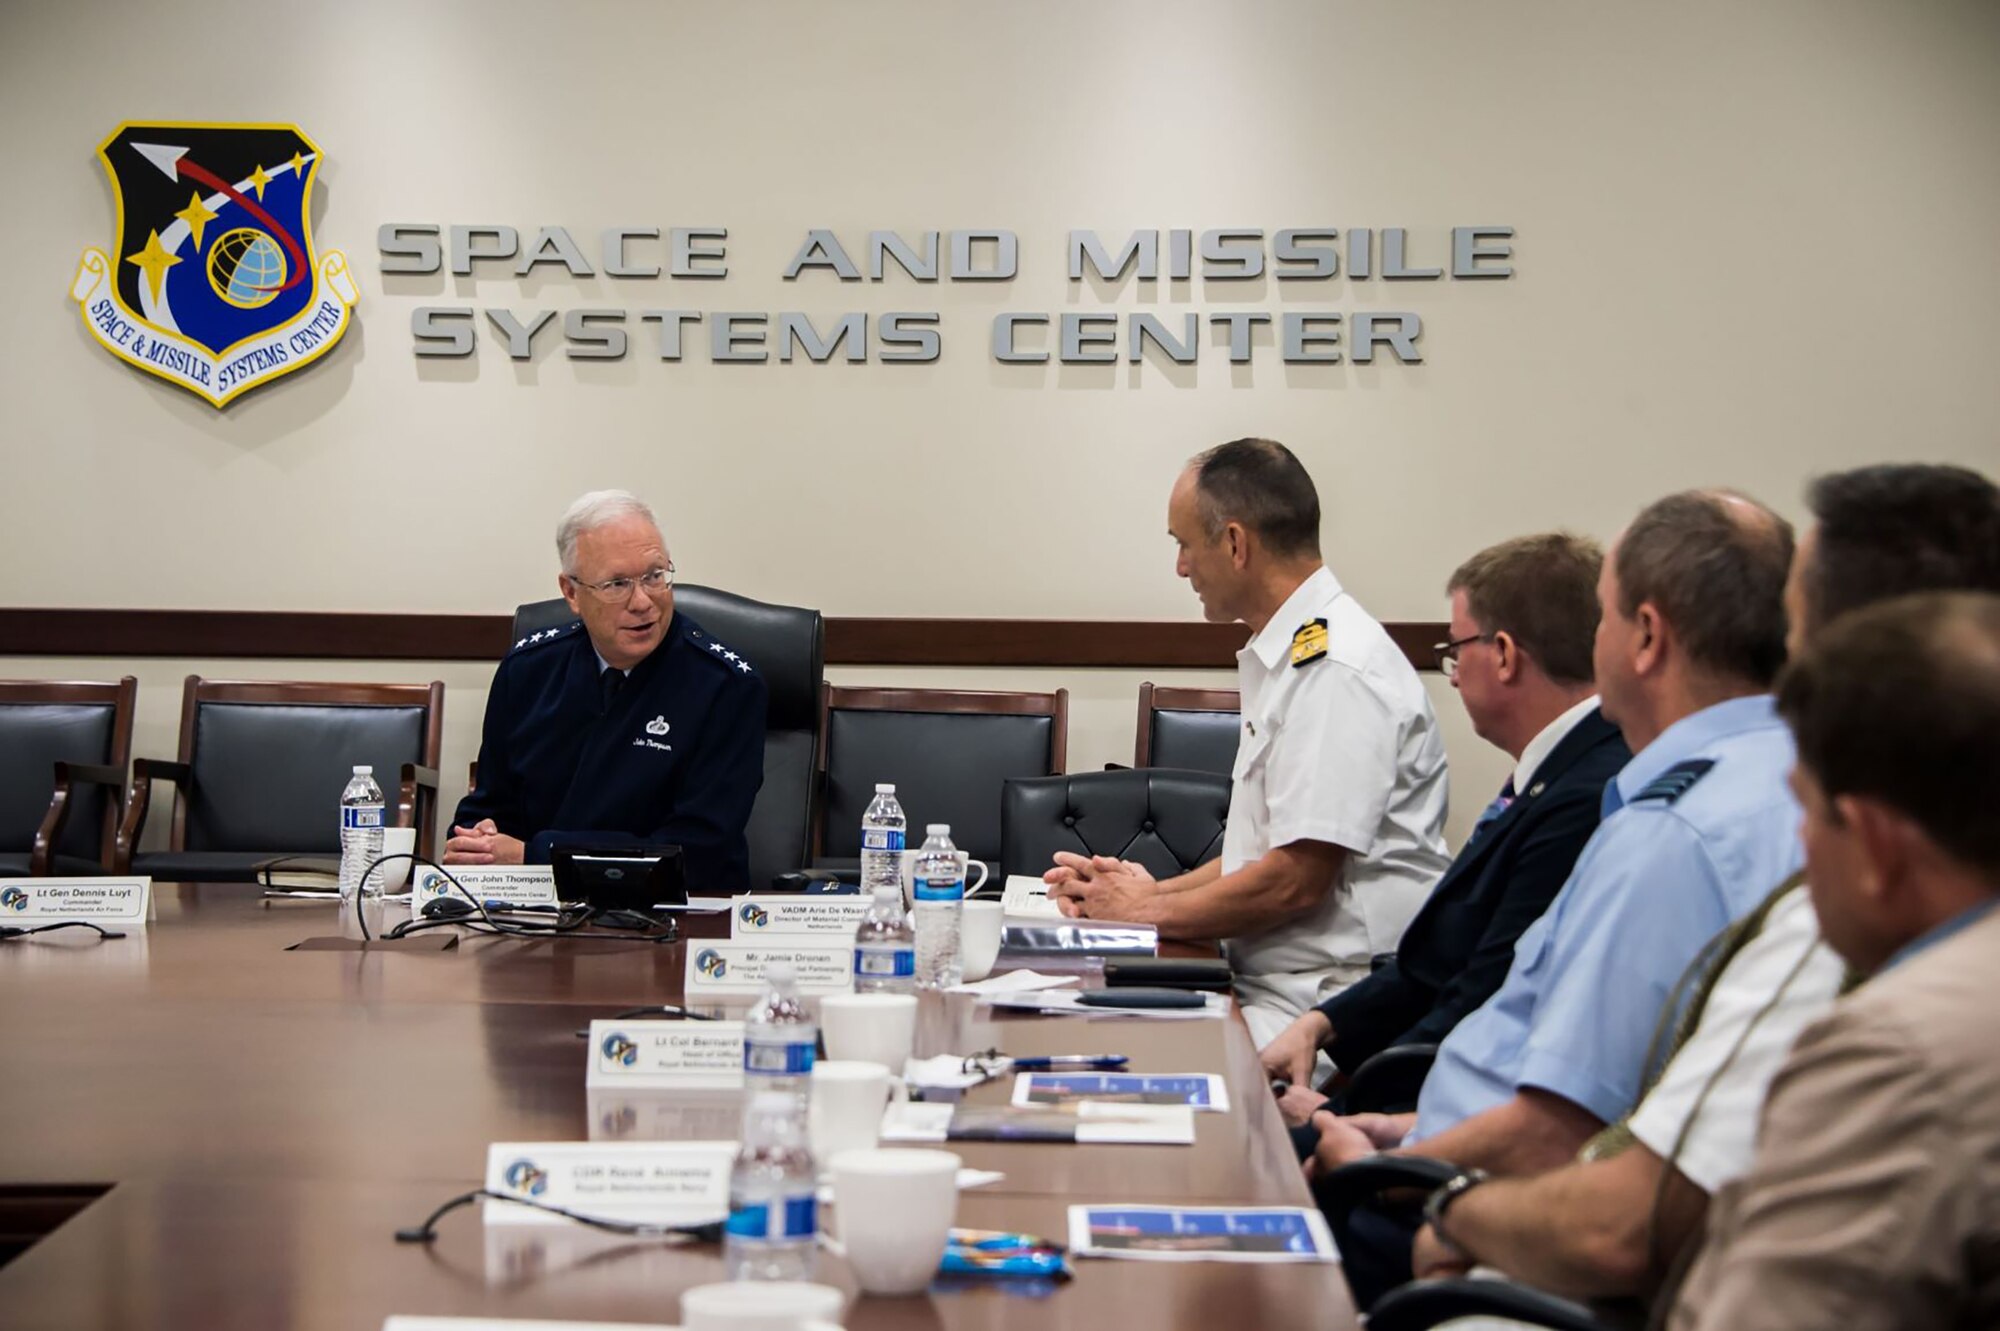 U.S. Air Force Lt. Gen. John F. Thompson, Space and Missile Systems Center commander and Department of the Air Force Program Executive Officer for Space, left, and attendees of an international partnership meeting discuss current and future military space efforts at Los Angeles Air Force Base, California, July 8, 2021. The U.S. Space Force recognizes the potential for cooperative agreements, joint capability development, and increased Dutch contribution to the NATO Alliance as an area favorable for engagement by U.S. and other allied stakeholders who seek to ensure space superiority. (U.S. Space Force photo by Van Ha)